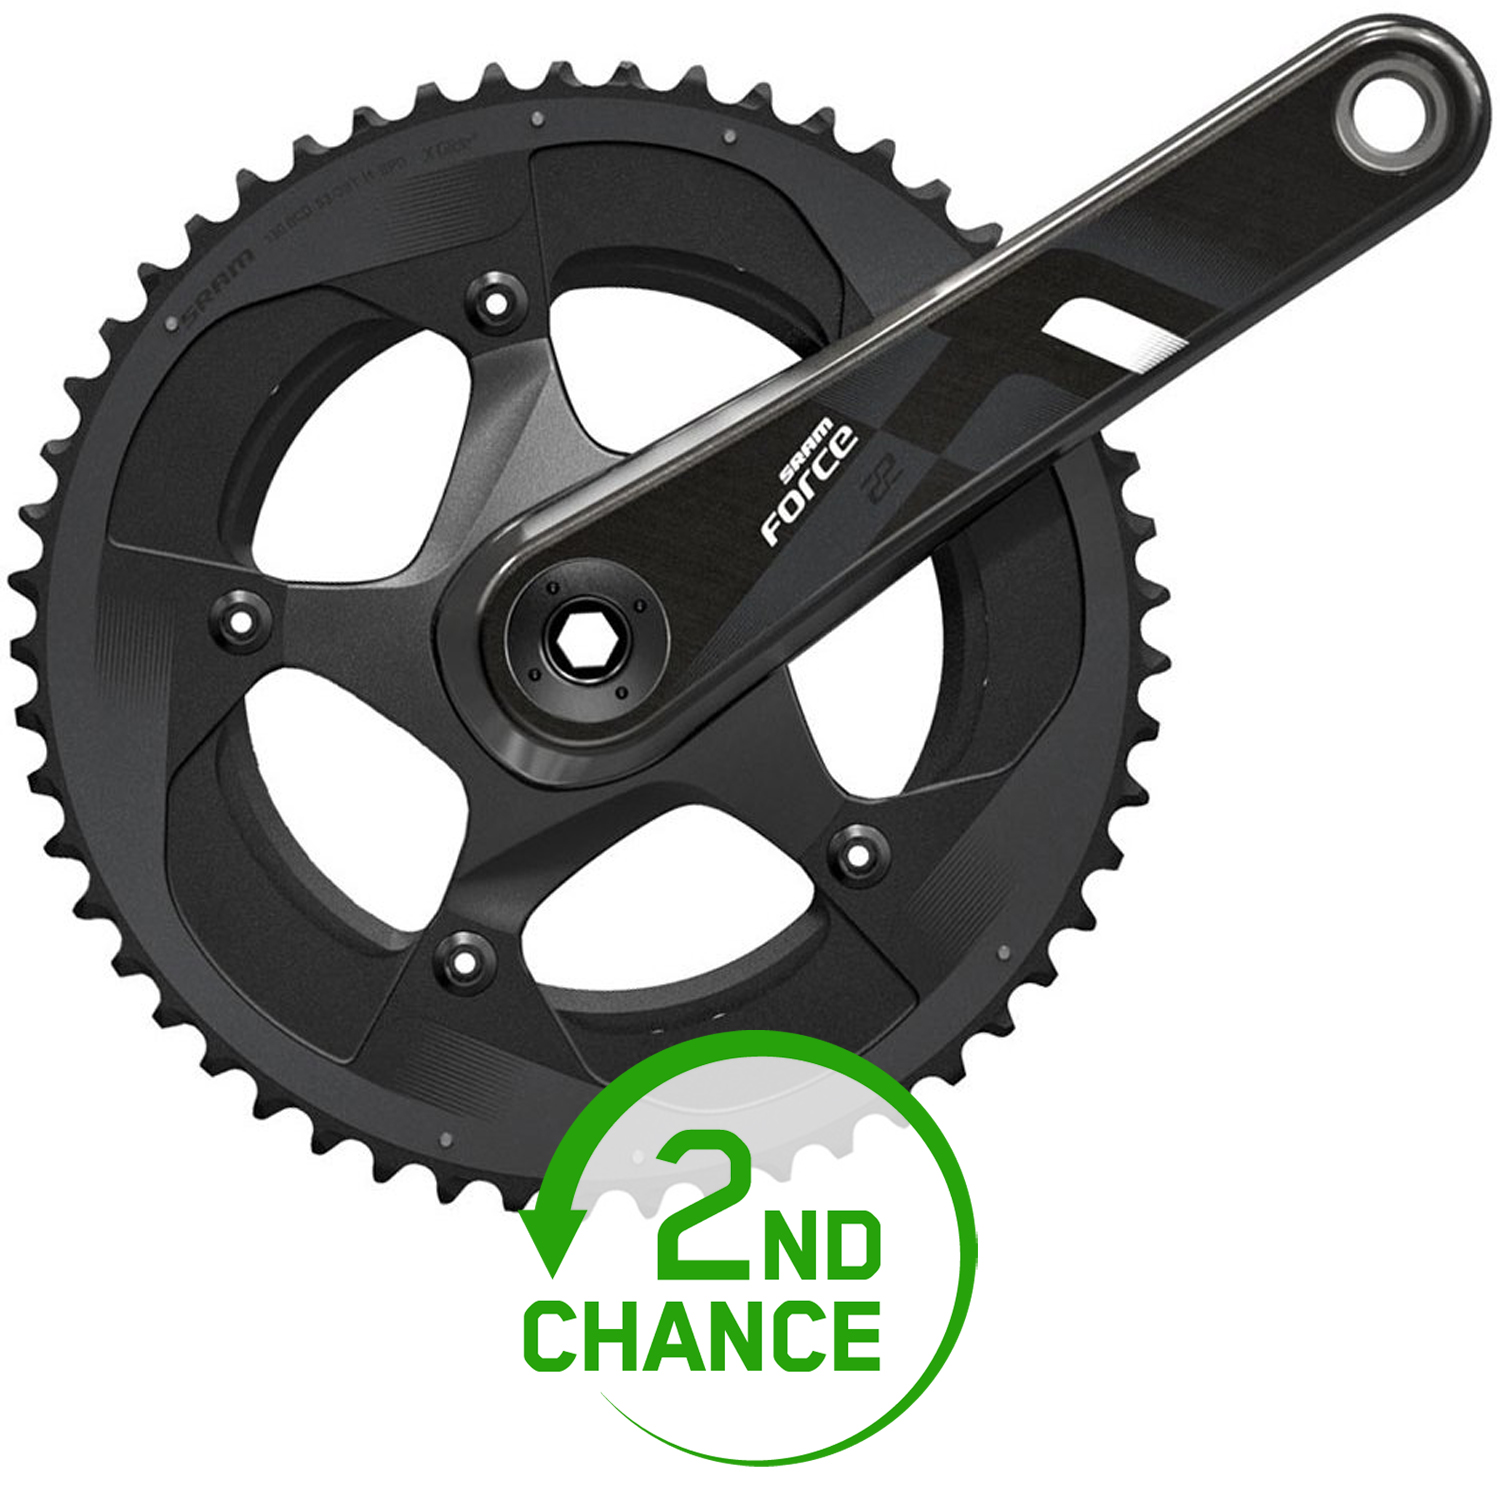 Picture of SRAM Force 22 Crankset 11-speed compact - GXP - 50/34 - black - 2nd Choice